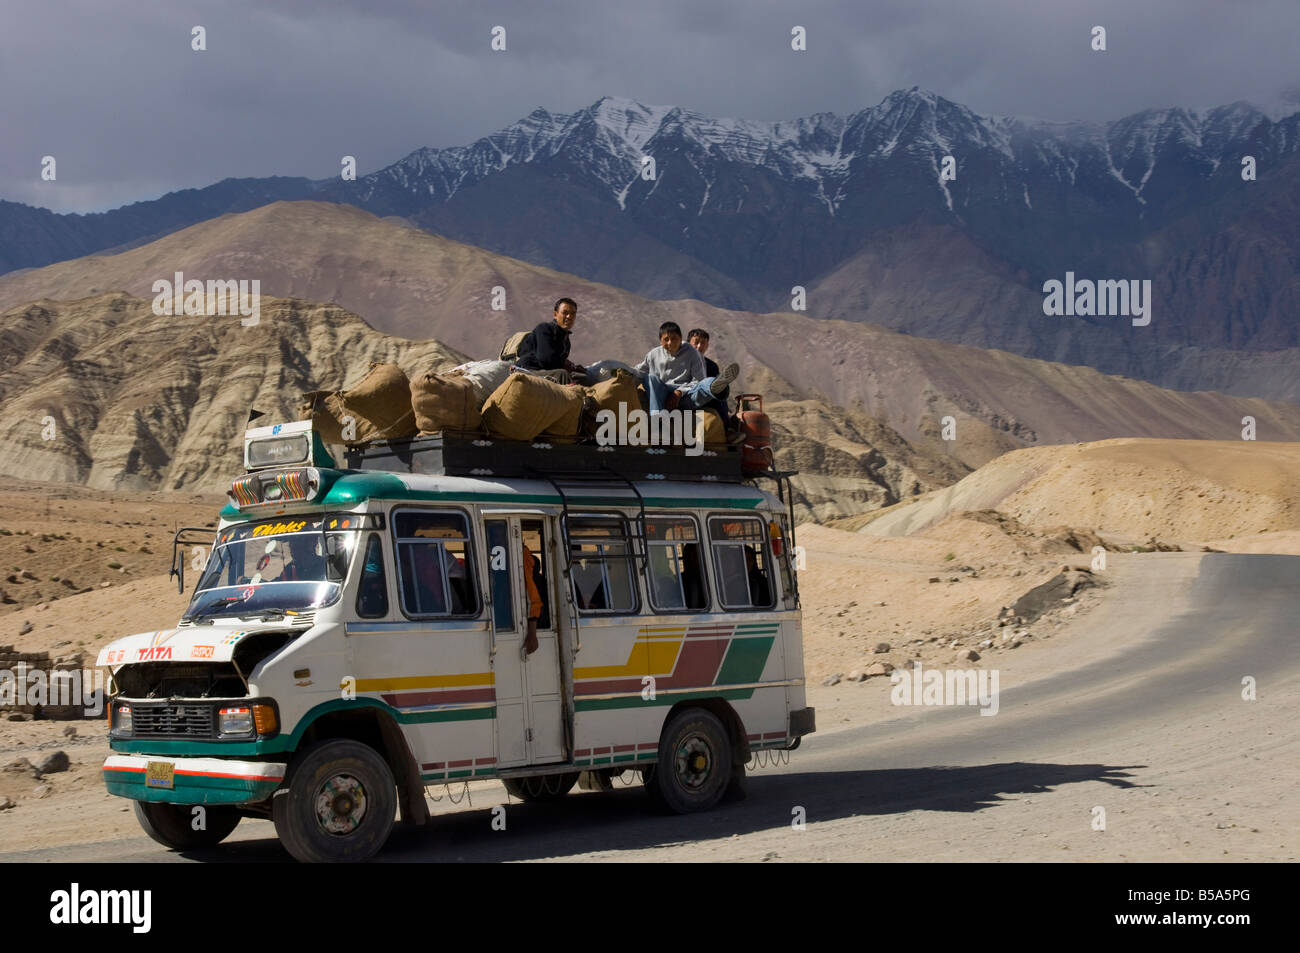 Loaded mini bus with half open engine lid and people sitting on the roof top, Indus Valley, Ladakh, India Stock Photo